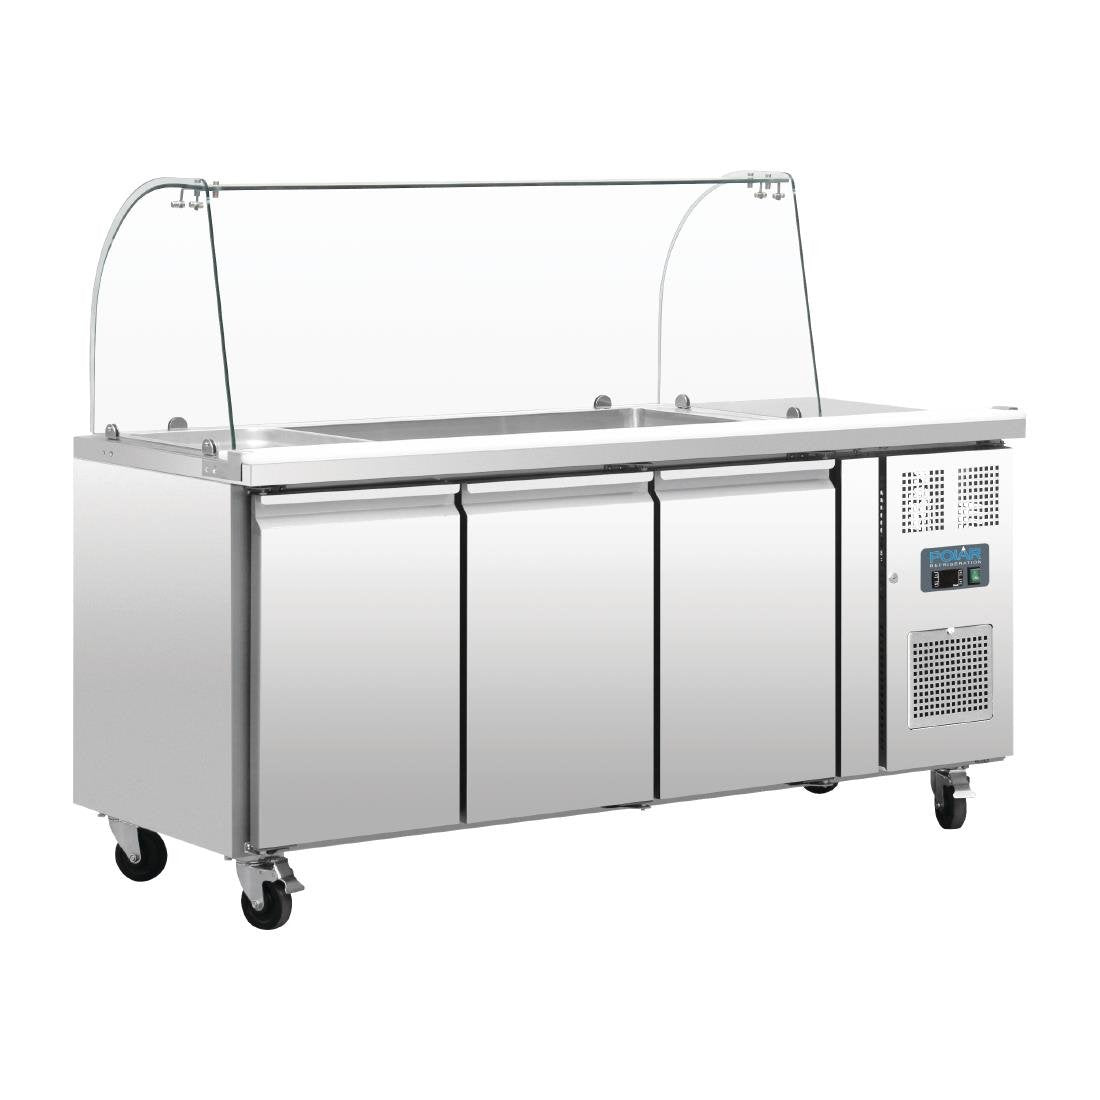 CT394 Polar U-Series Triple Door Refrigerated Gastronorm Saladette Counter CT394